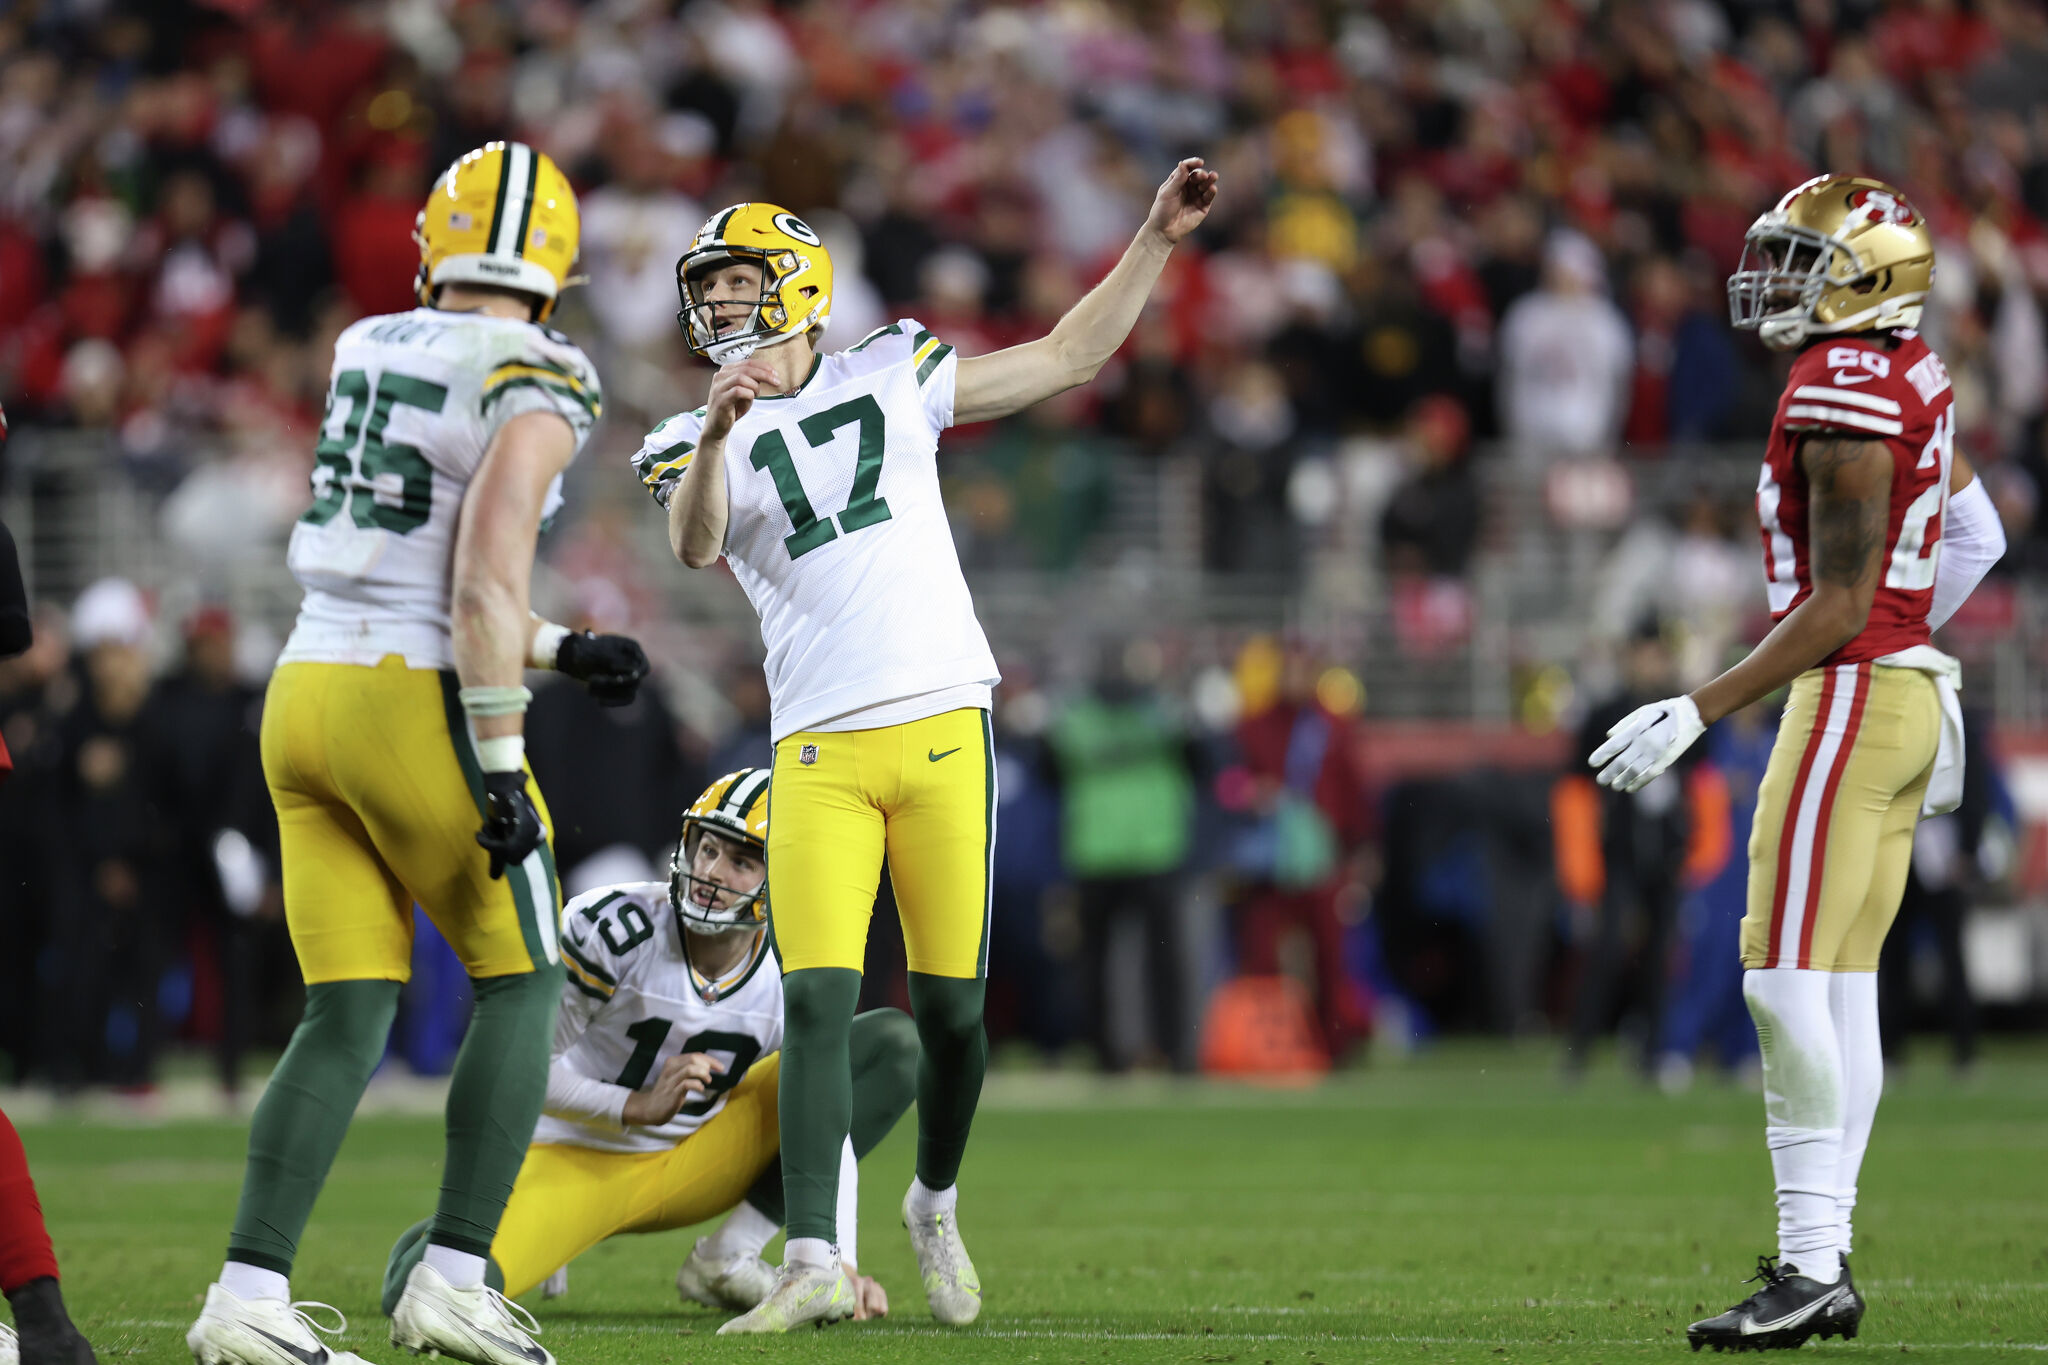 Reporter had brutal quote on Packers' faith in kicker after 49ers miss